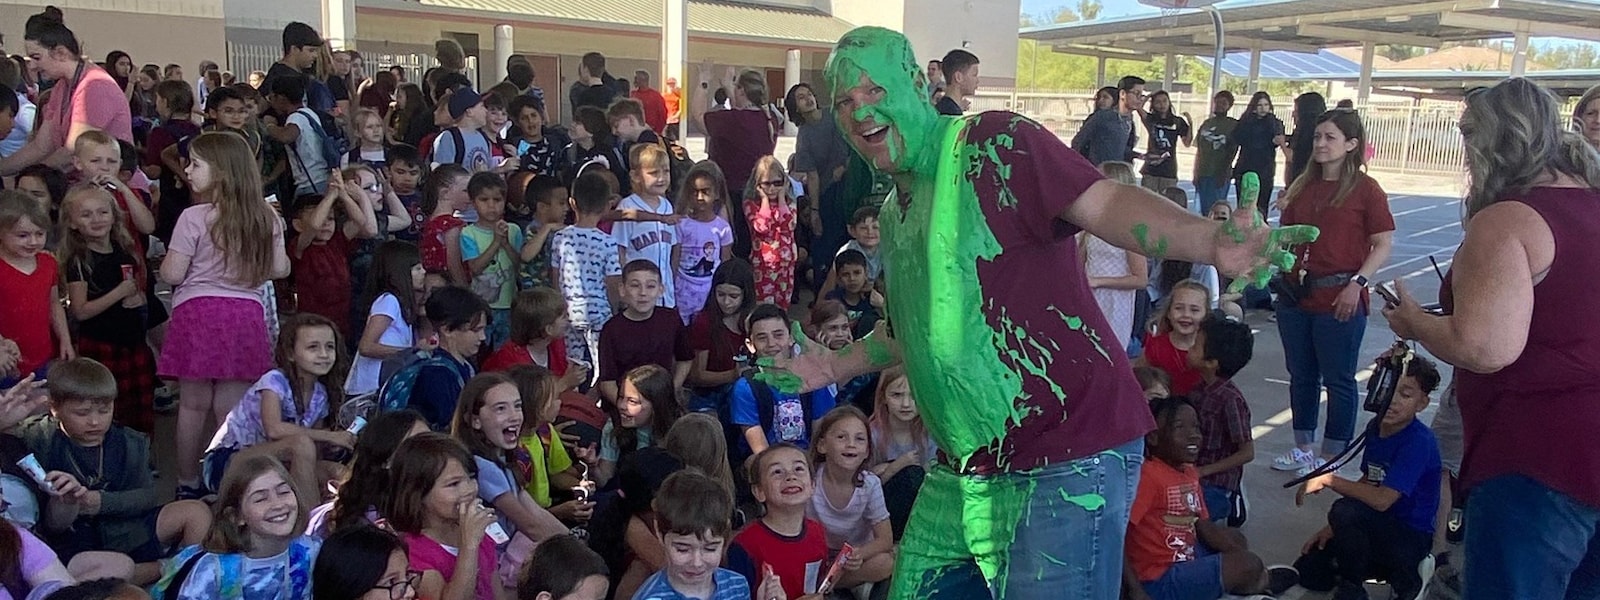 Mr Griesel with slime on him standing with students